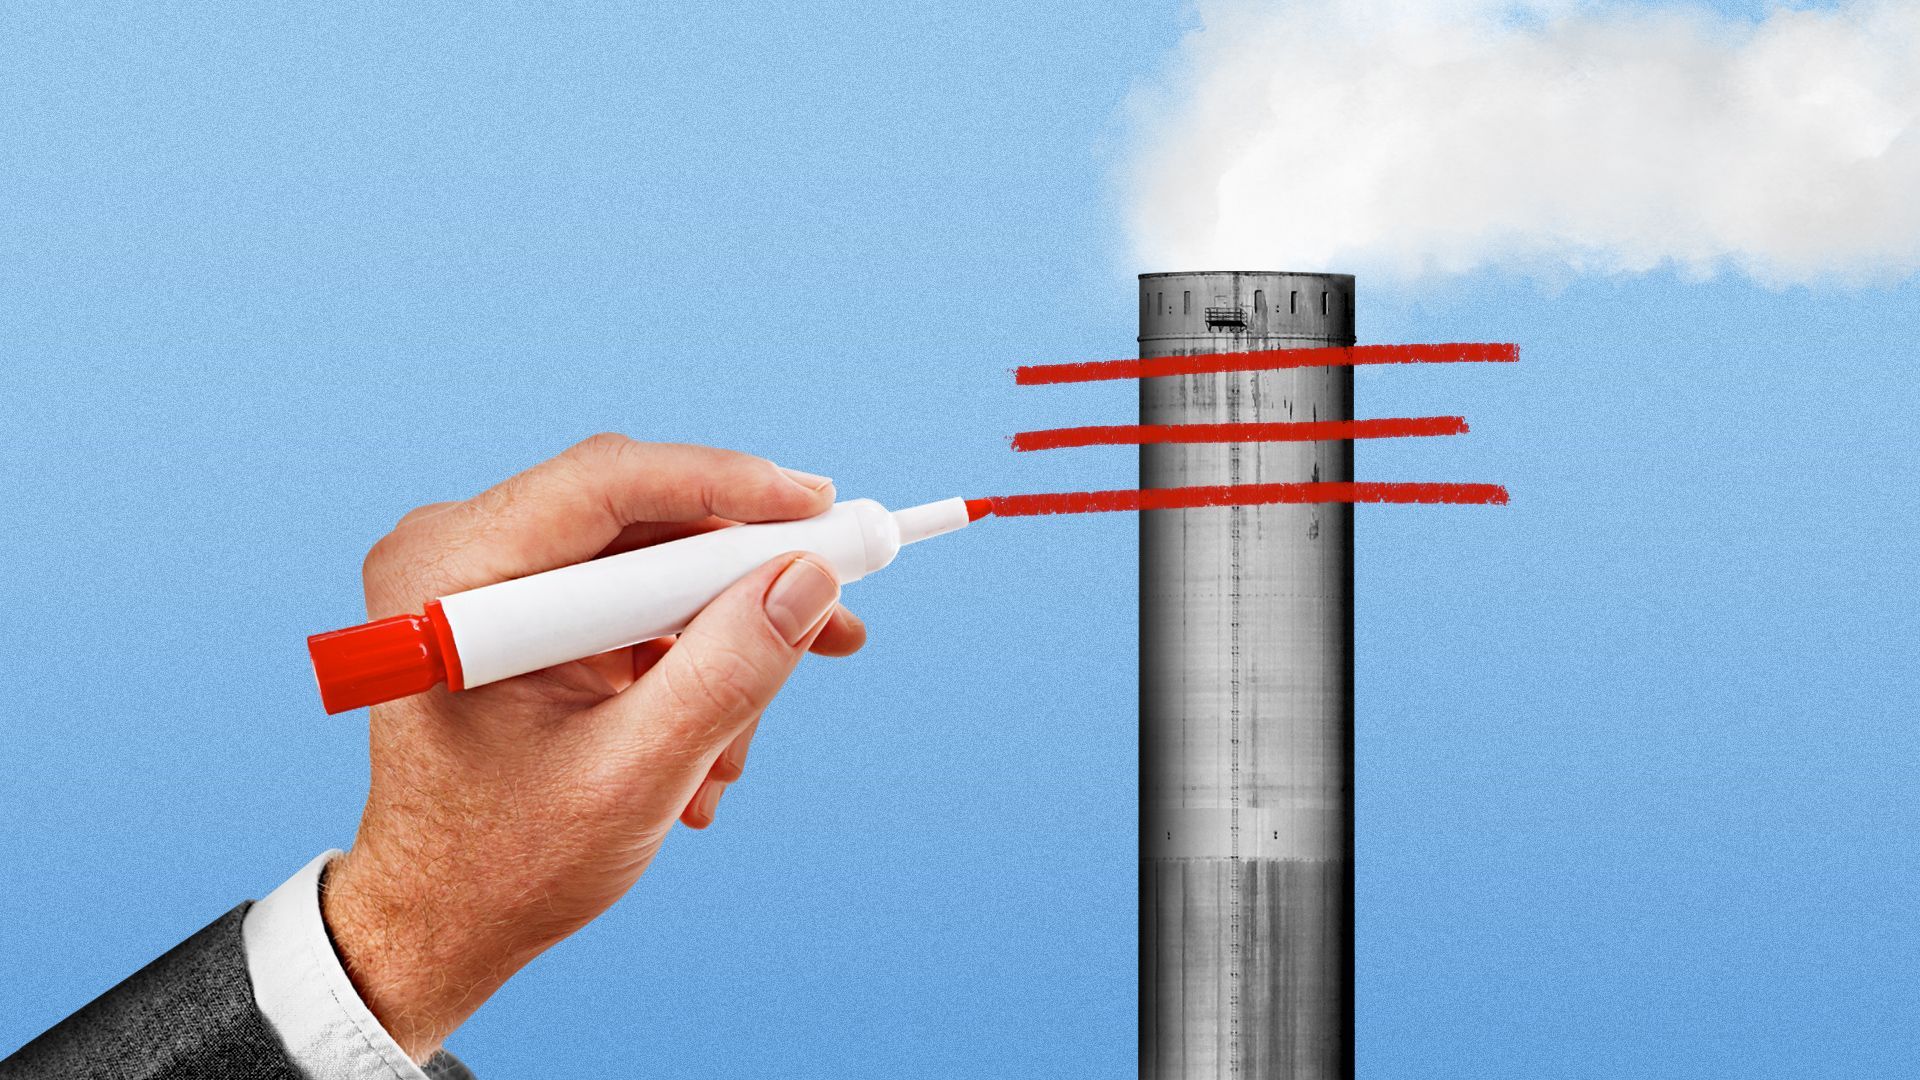 Illustration of a hand holding a red marker that is drawing red lines over a smoke stack.